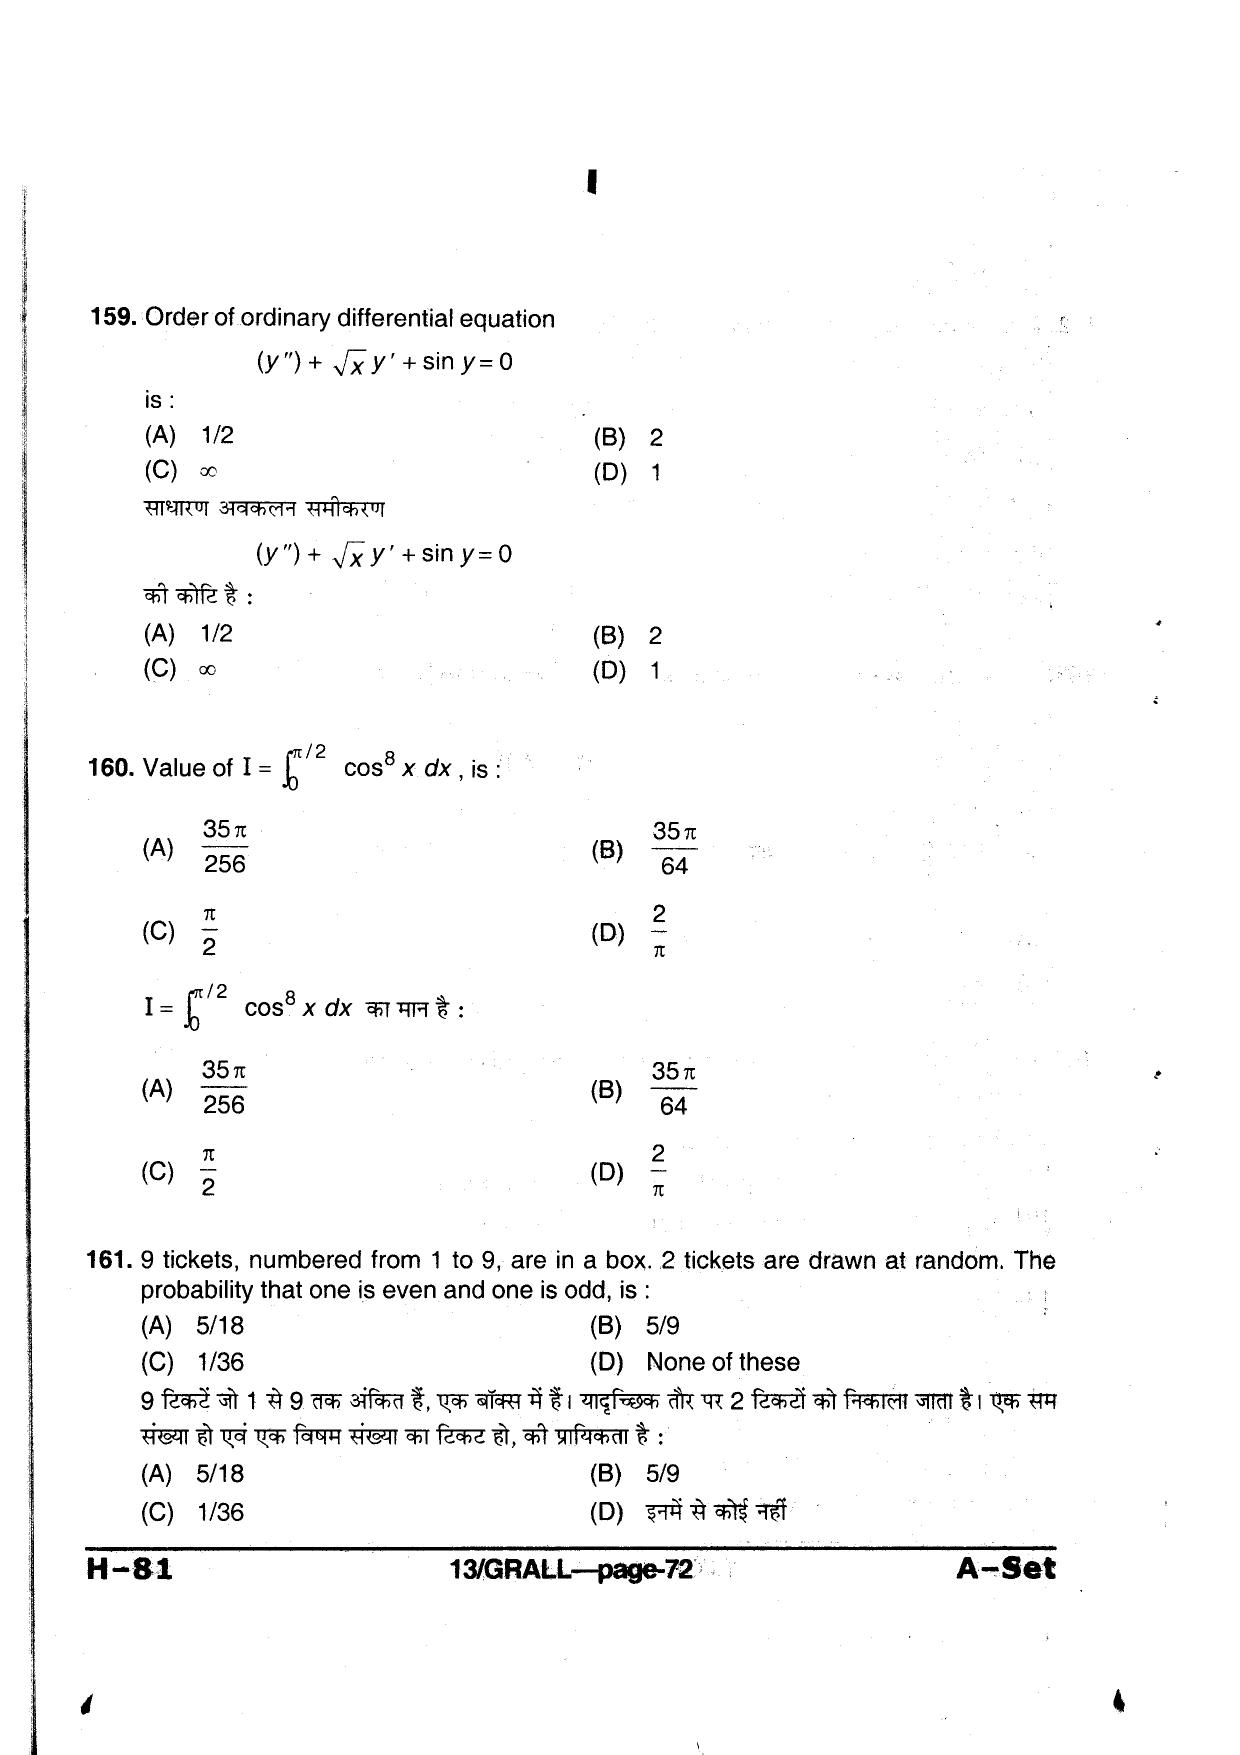 MP PAT 2013 Question Paper - Paper I - Page 72